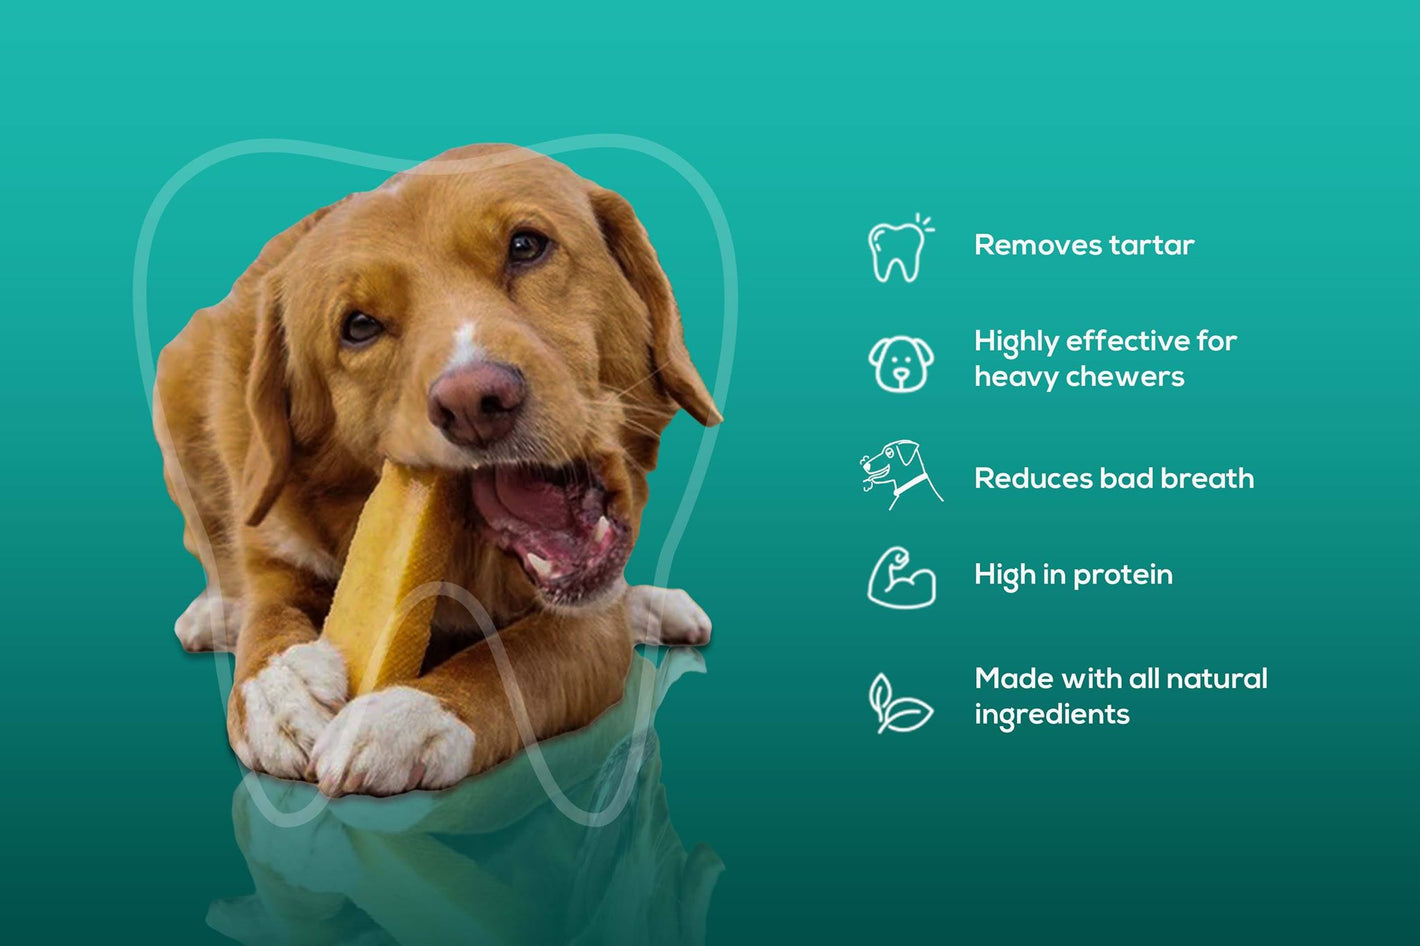 Our Yak milk Dental Dog Treats excellent at removing plaque and tartar and keeping gums strong